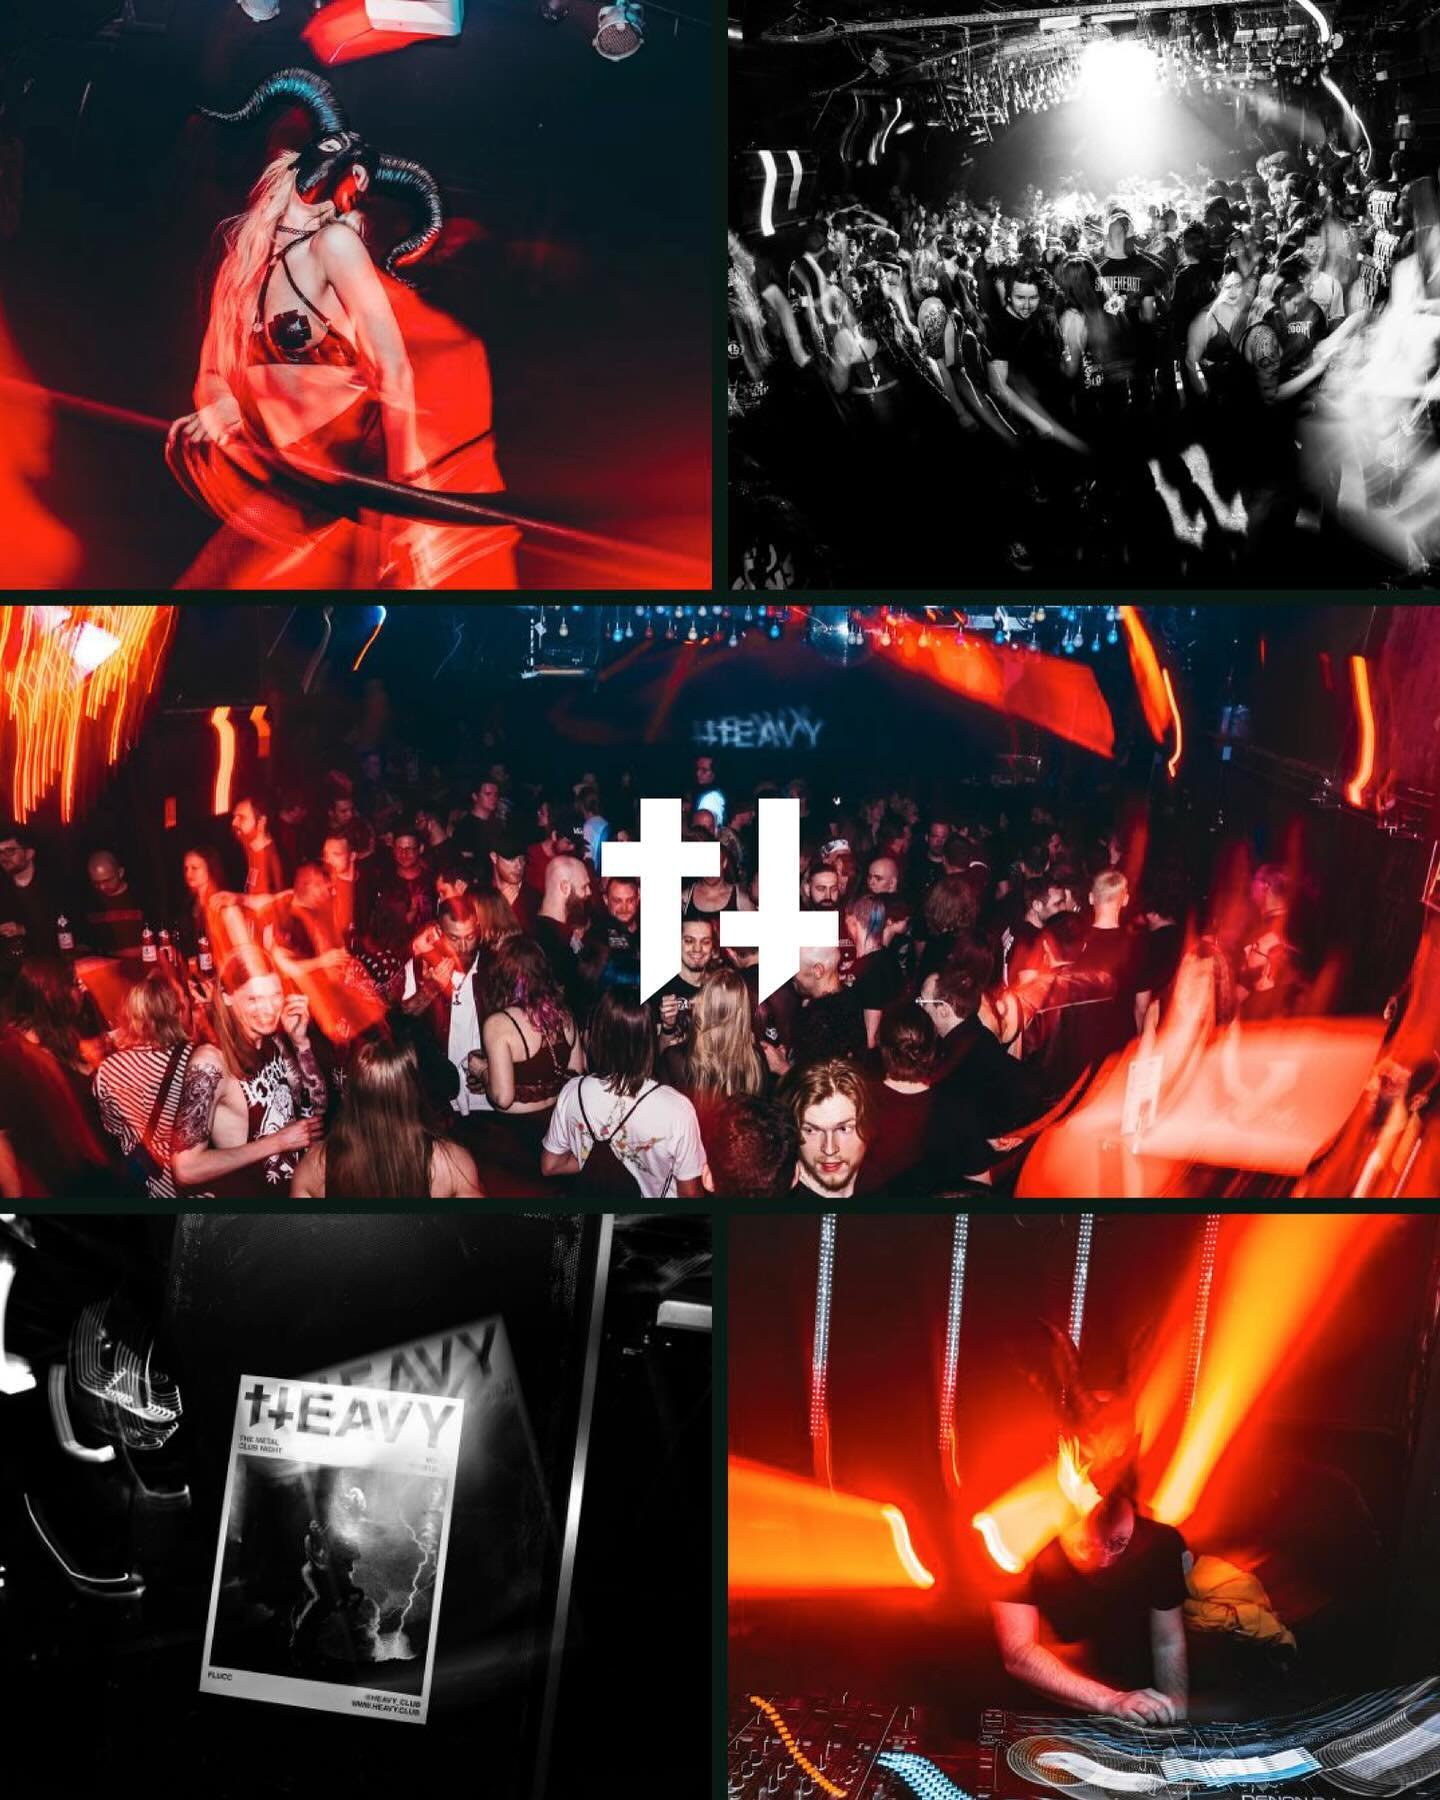 ++ WHAT A NIGHT! 🔥✝️🔥 ++ ALL PHOTOS ARE COMING 🔜 ++